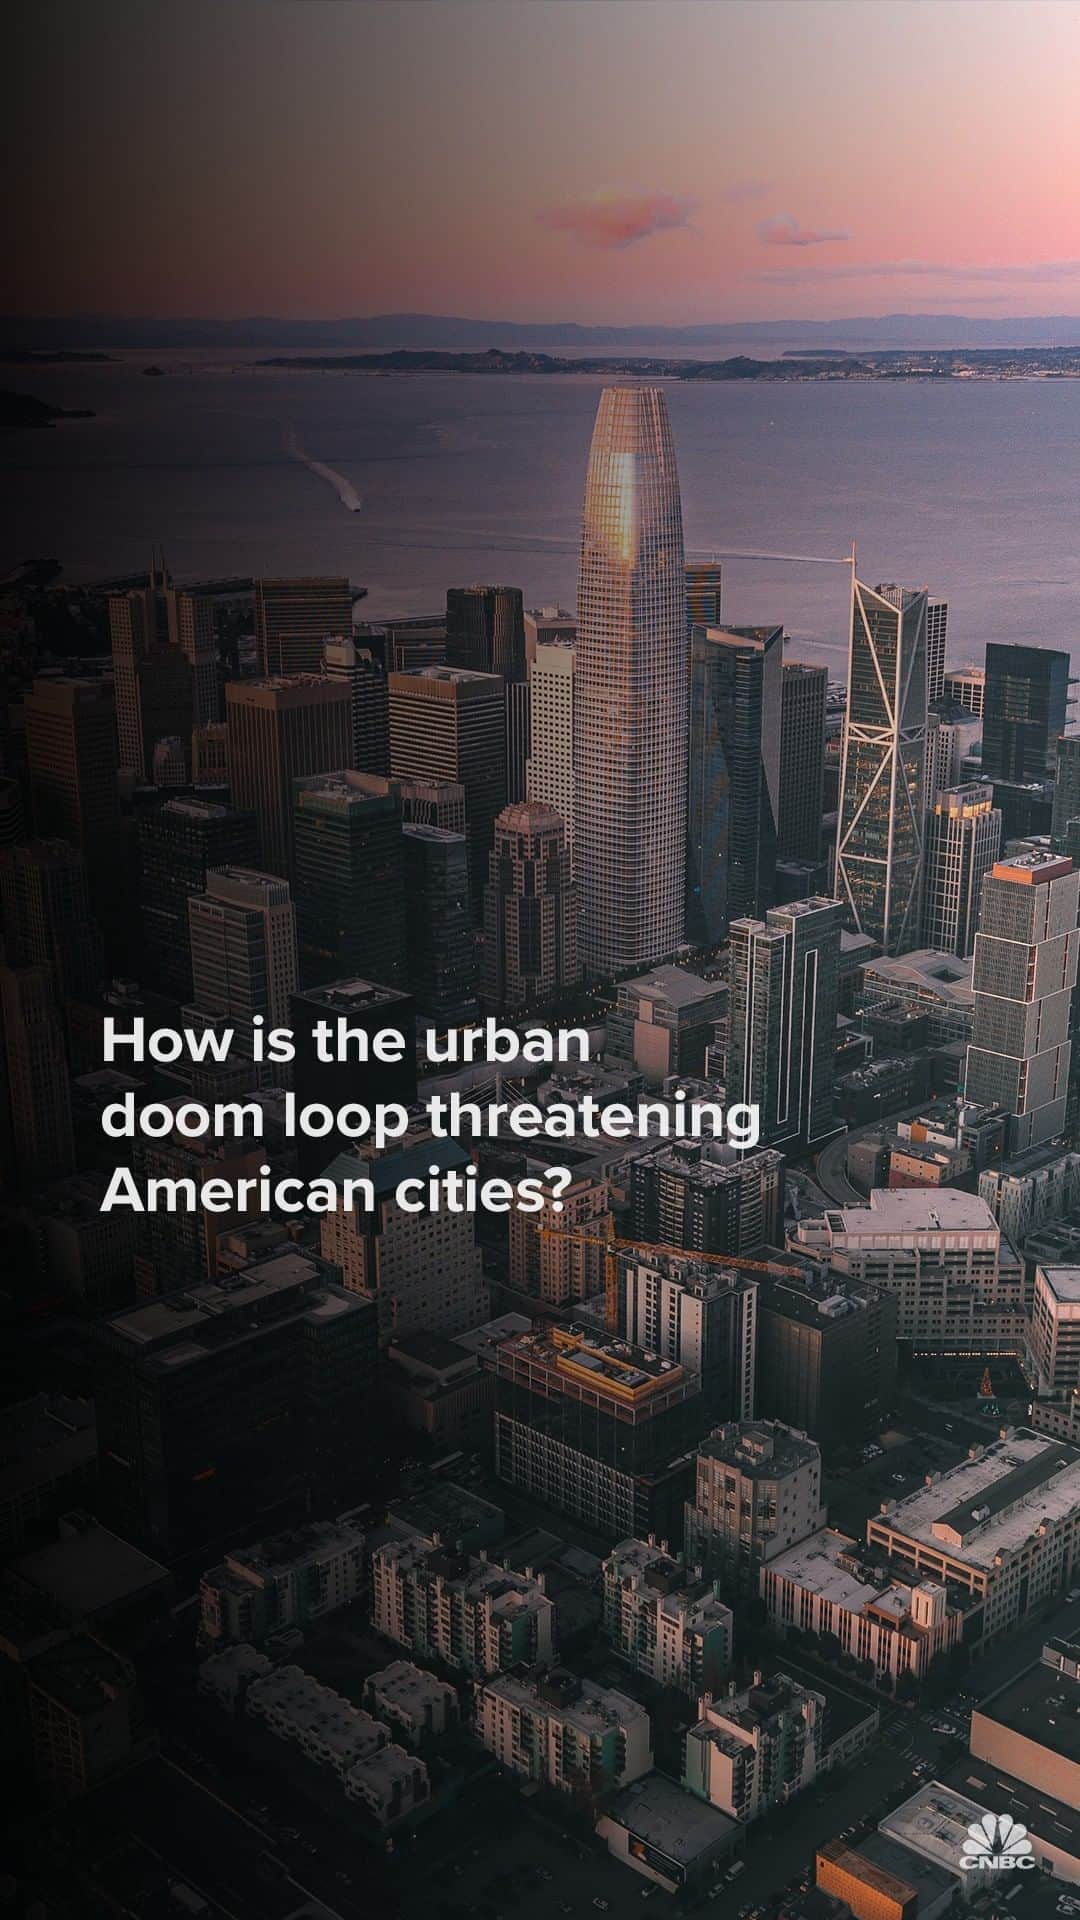 CNBCのインスタグラム：「The “urban doom loop” is threatening American cities.  From San Francisco to New York, cities across America are dealing with the budgetary consequences of vacant commercial office buildings. And regional banks, which hold a lot of commercial real estate debt, now face a credit crunch.  Watch the full video to to see what local governments can do to avoid falling further into fiscal trouble, at the link in bio.」